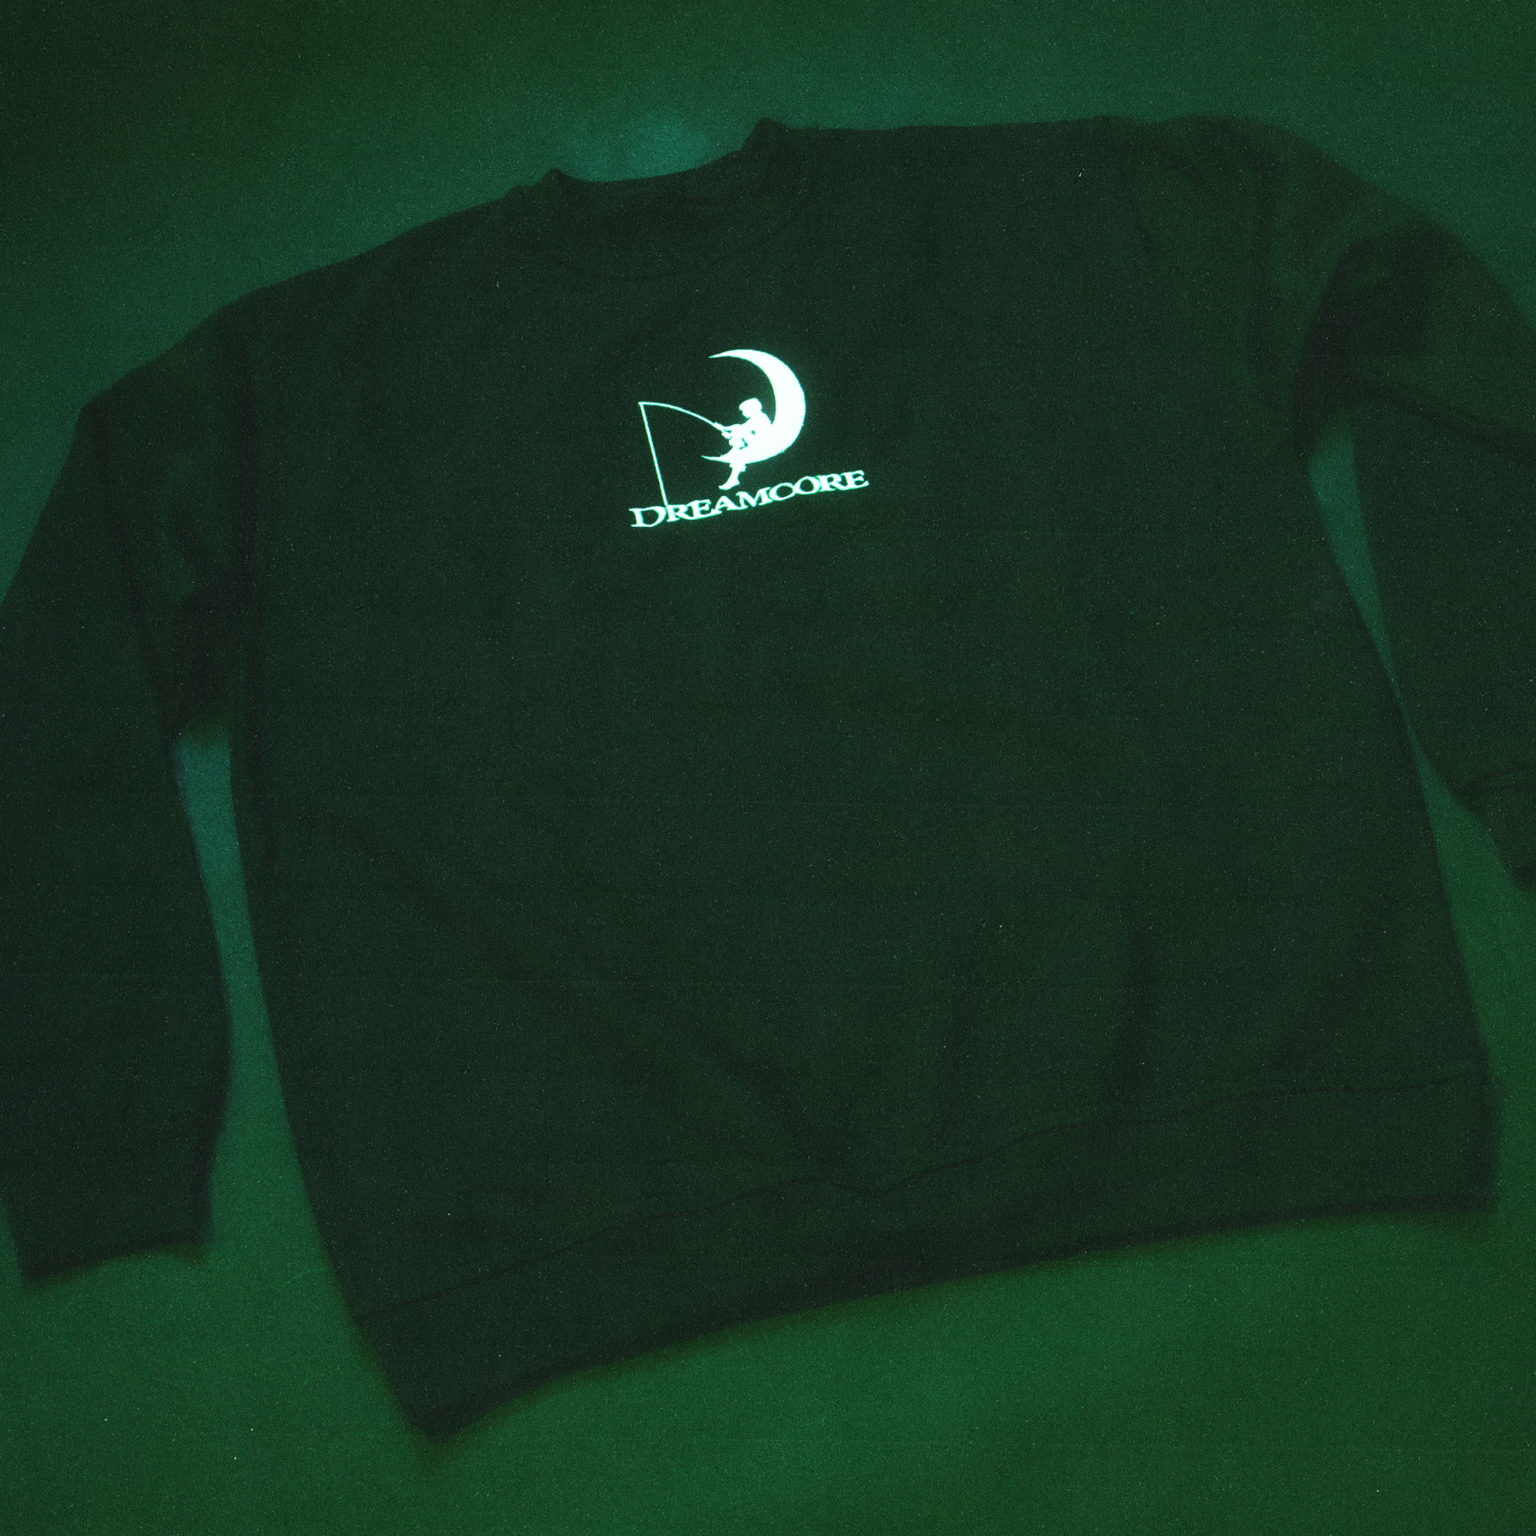 Frank Ocean - Dreamcore Unisex Embroidered Sweater